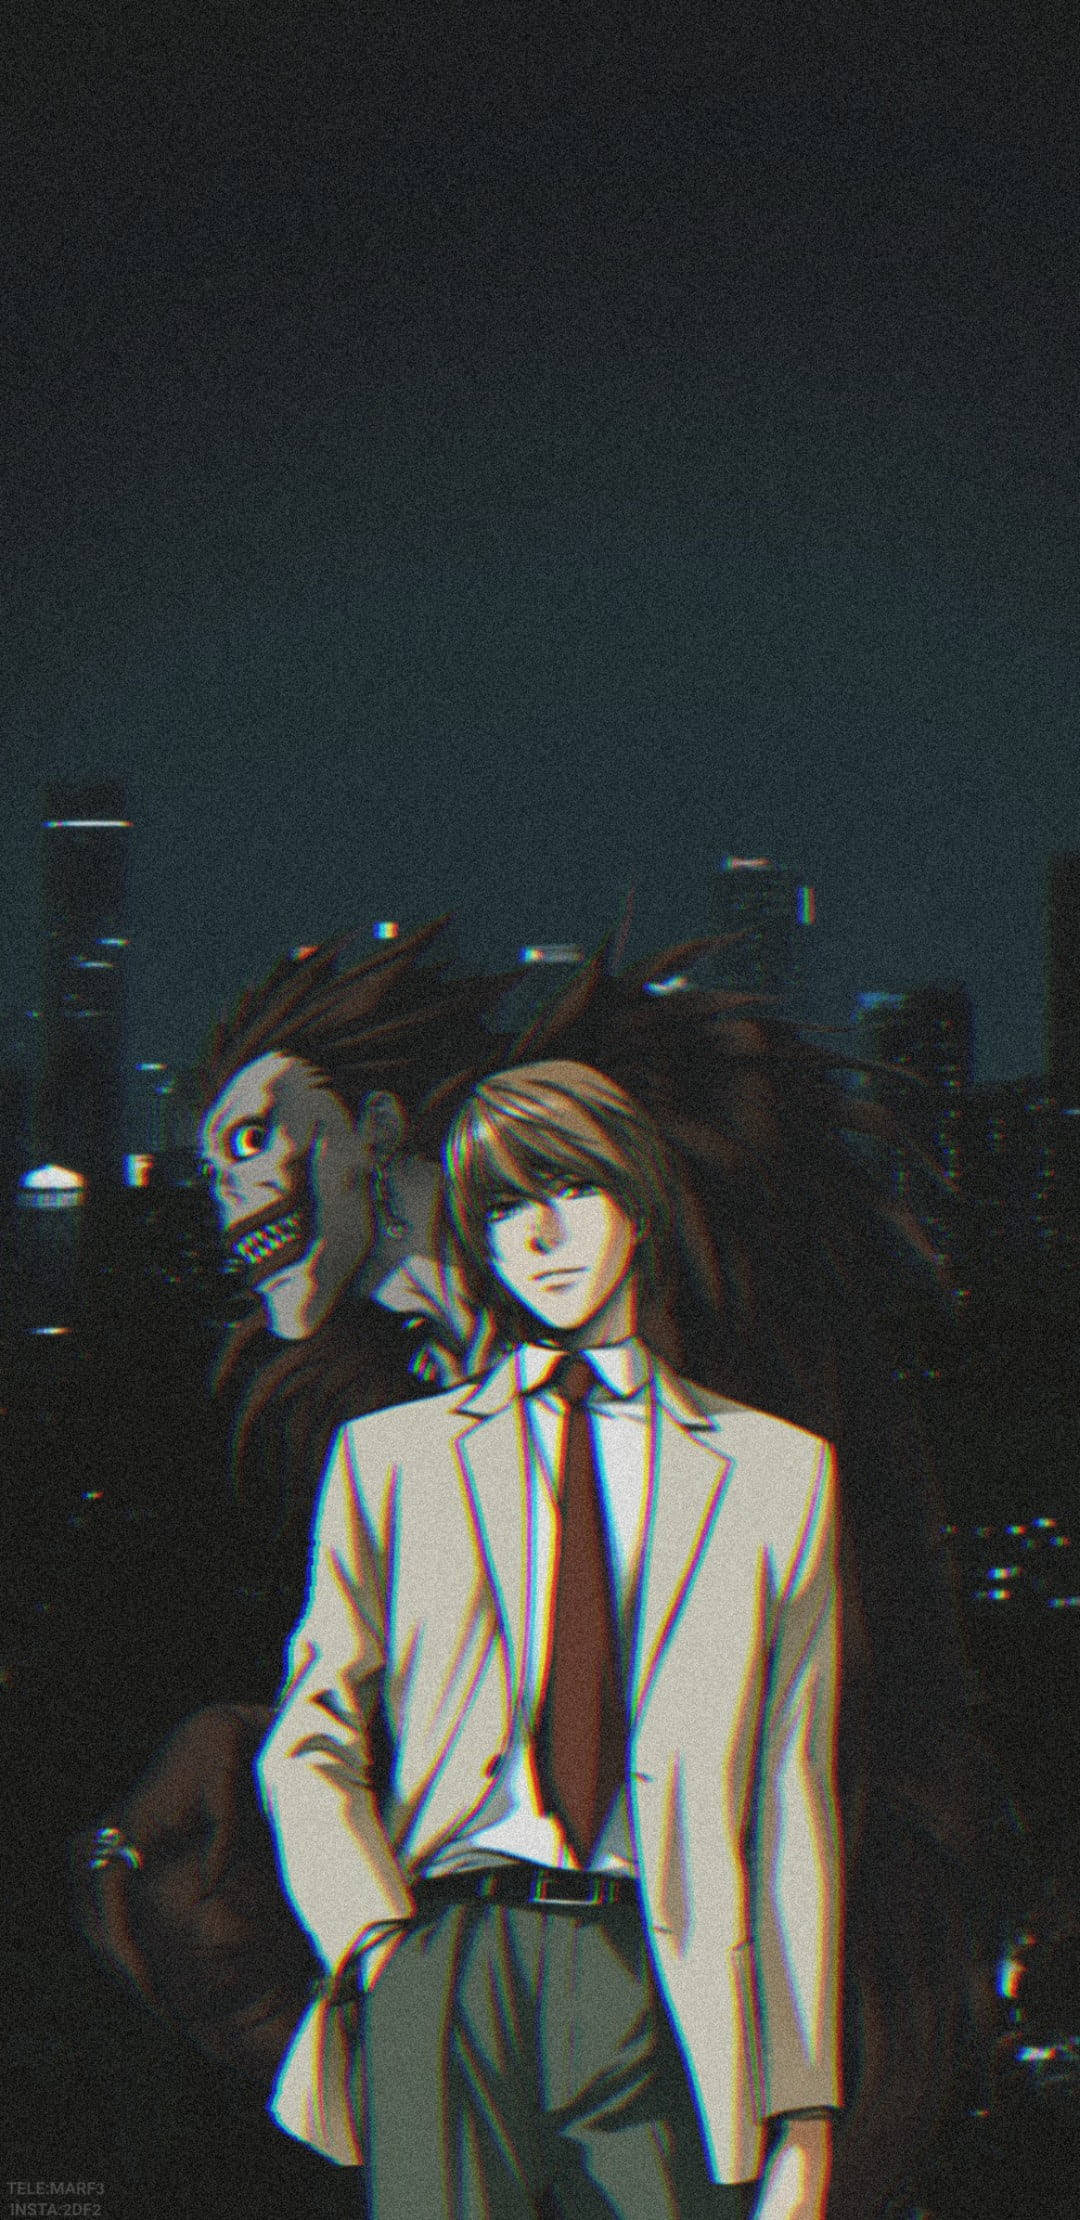 Download Light, Ryuk, And City Death Note Phone Wallpaper 